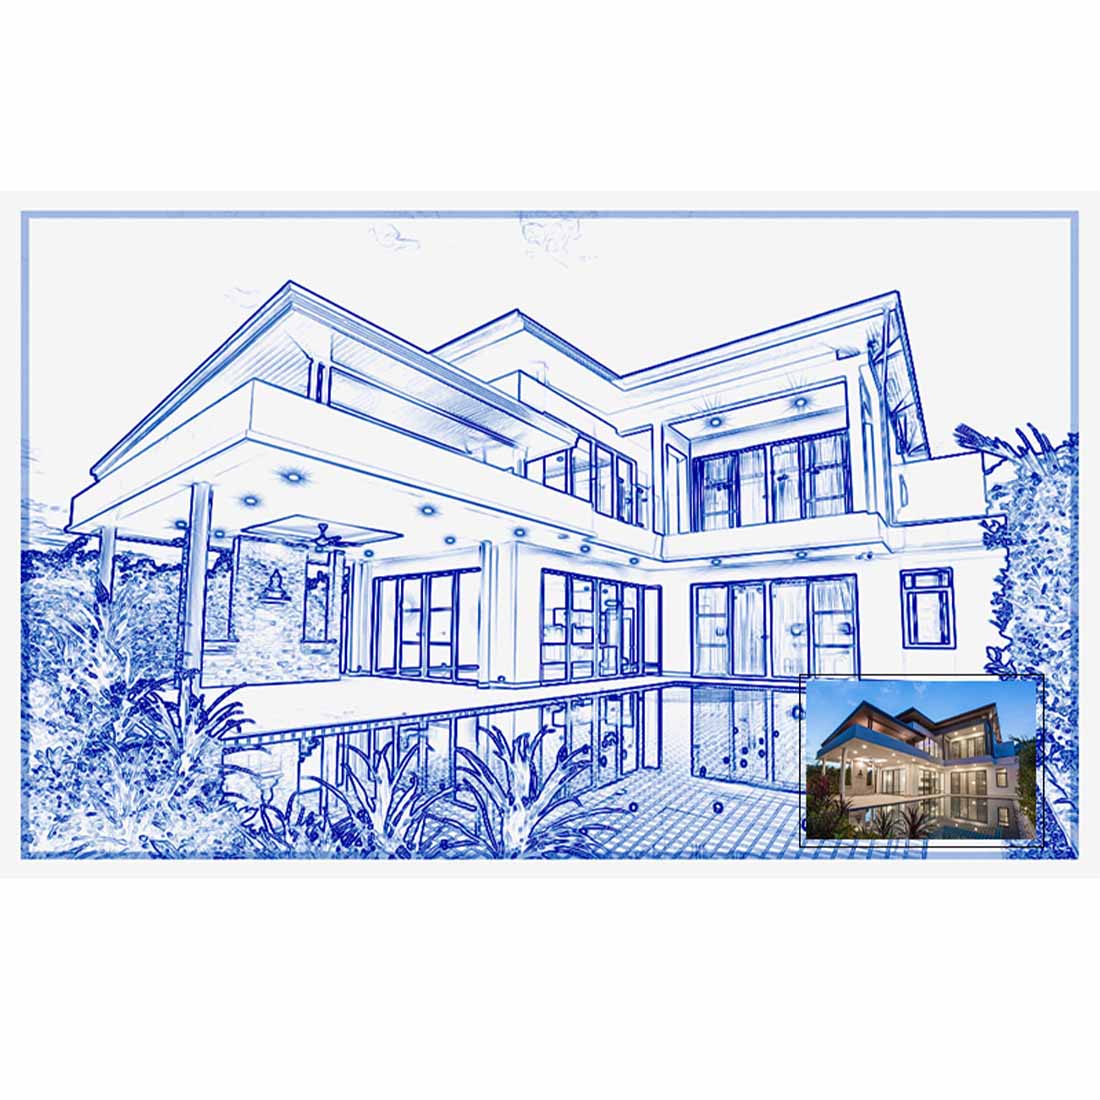 Architecture Sketch photoshop Action preview image.